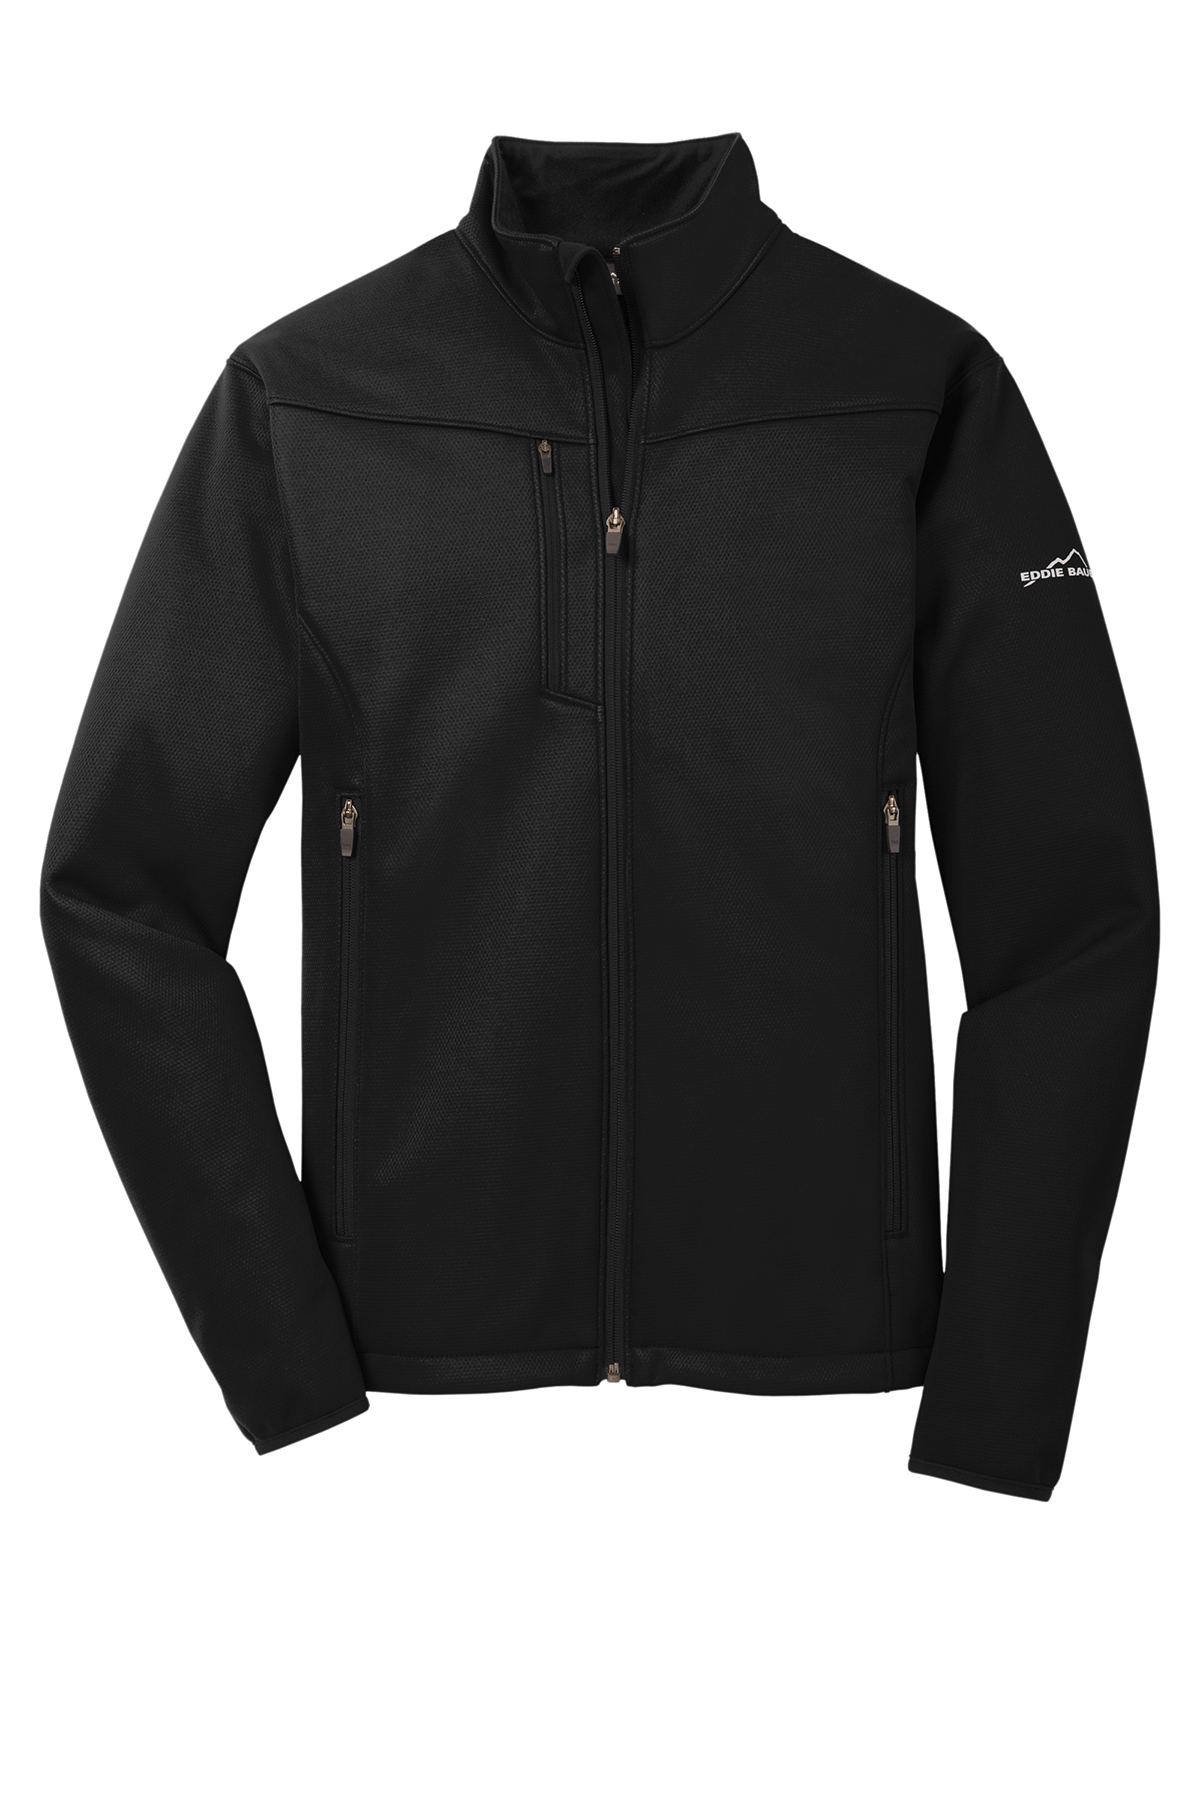 Eddie Bauer Weather-Resist Soft Shell Jacket | Product | Company Casuals